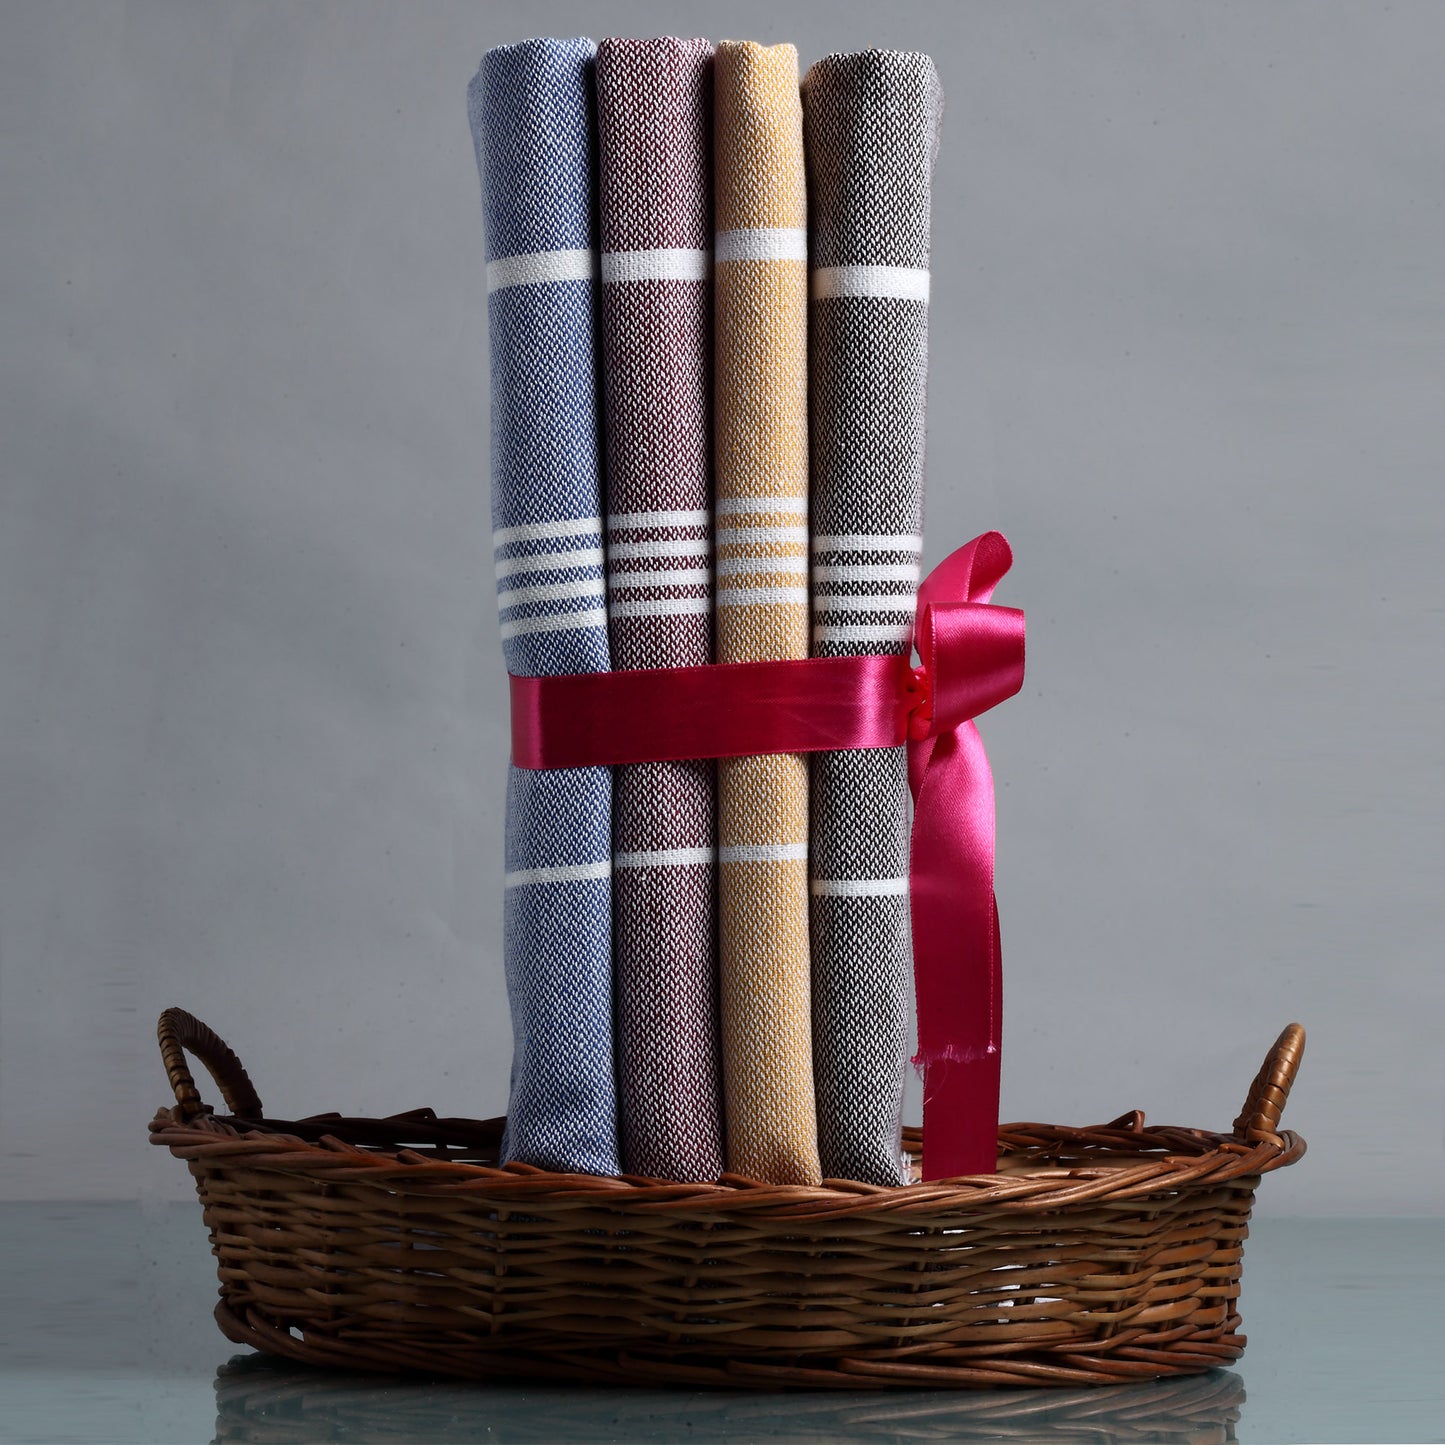 Turkish Style 100% Cotton Bathroom Towels Set of 4 By KLOTTHE®